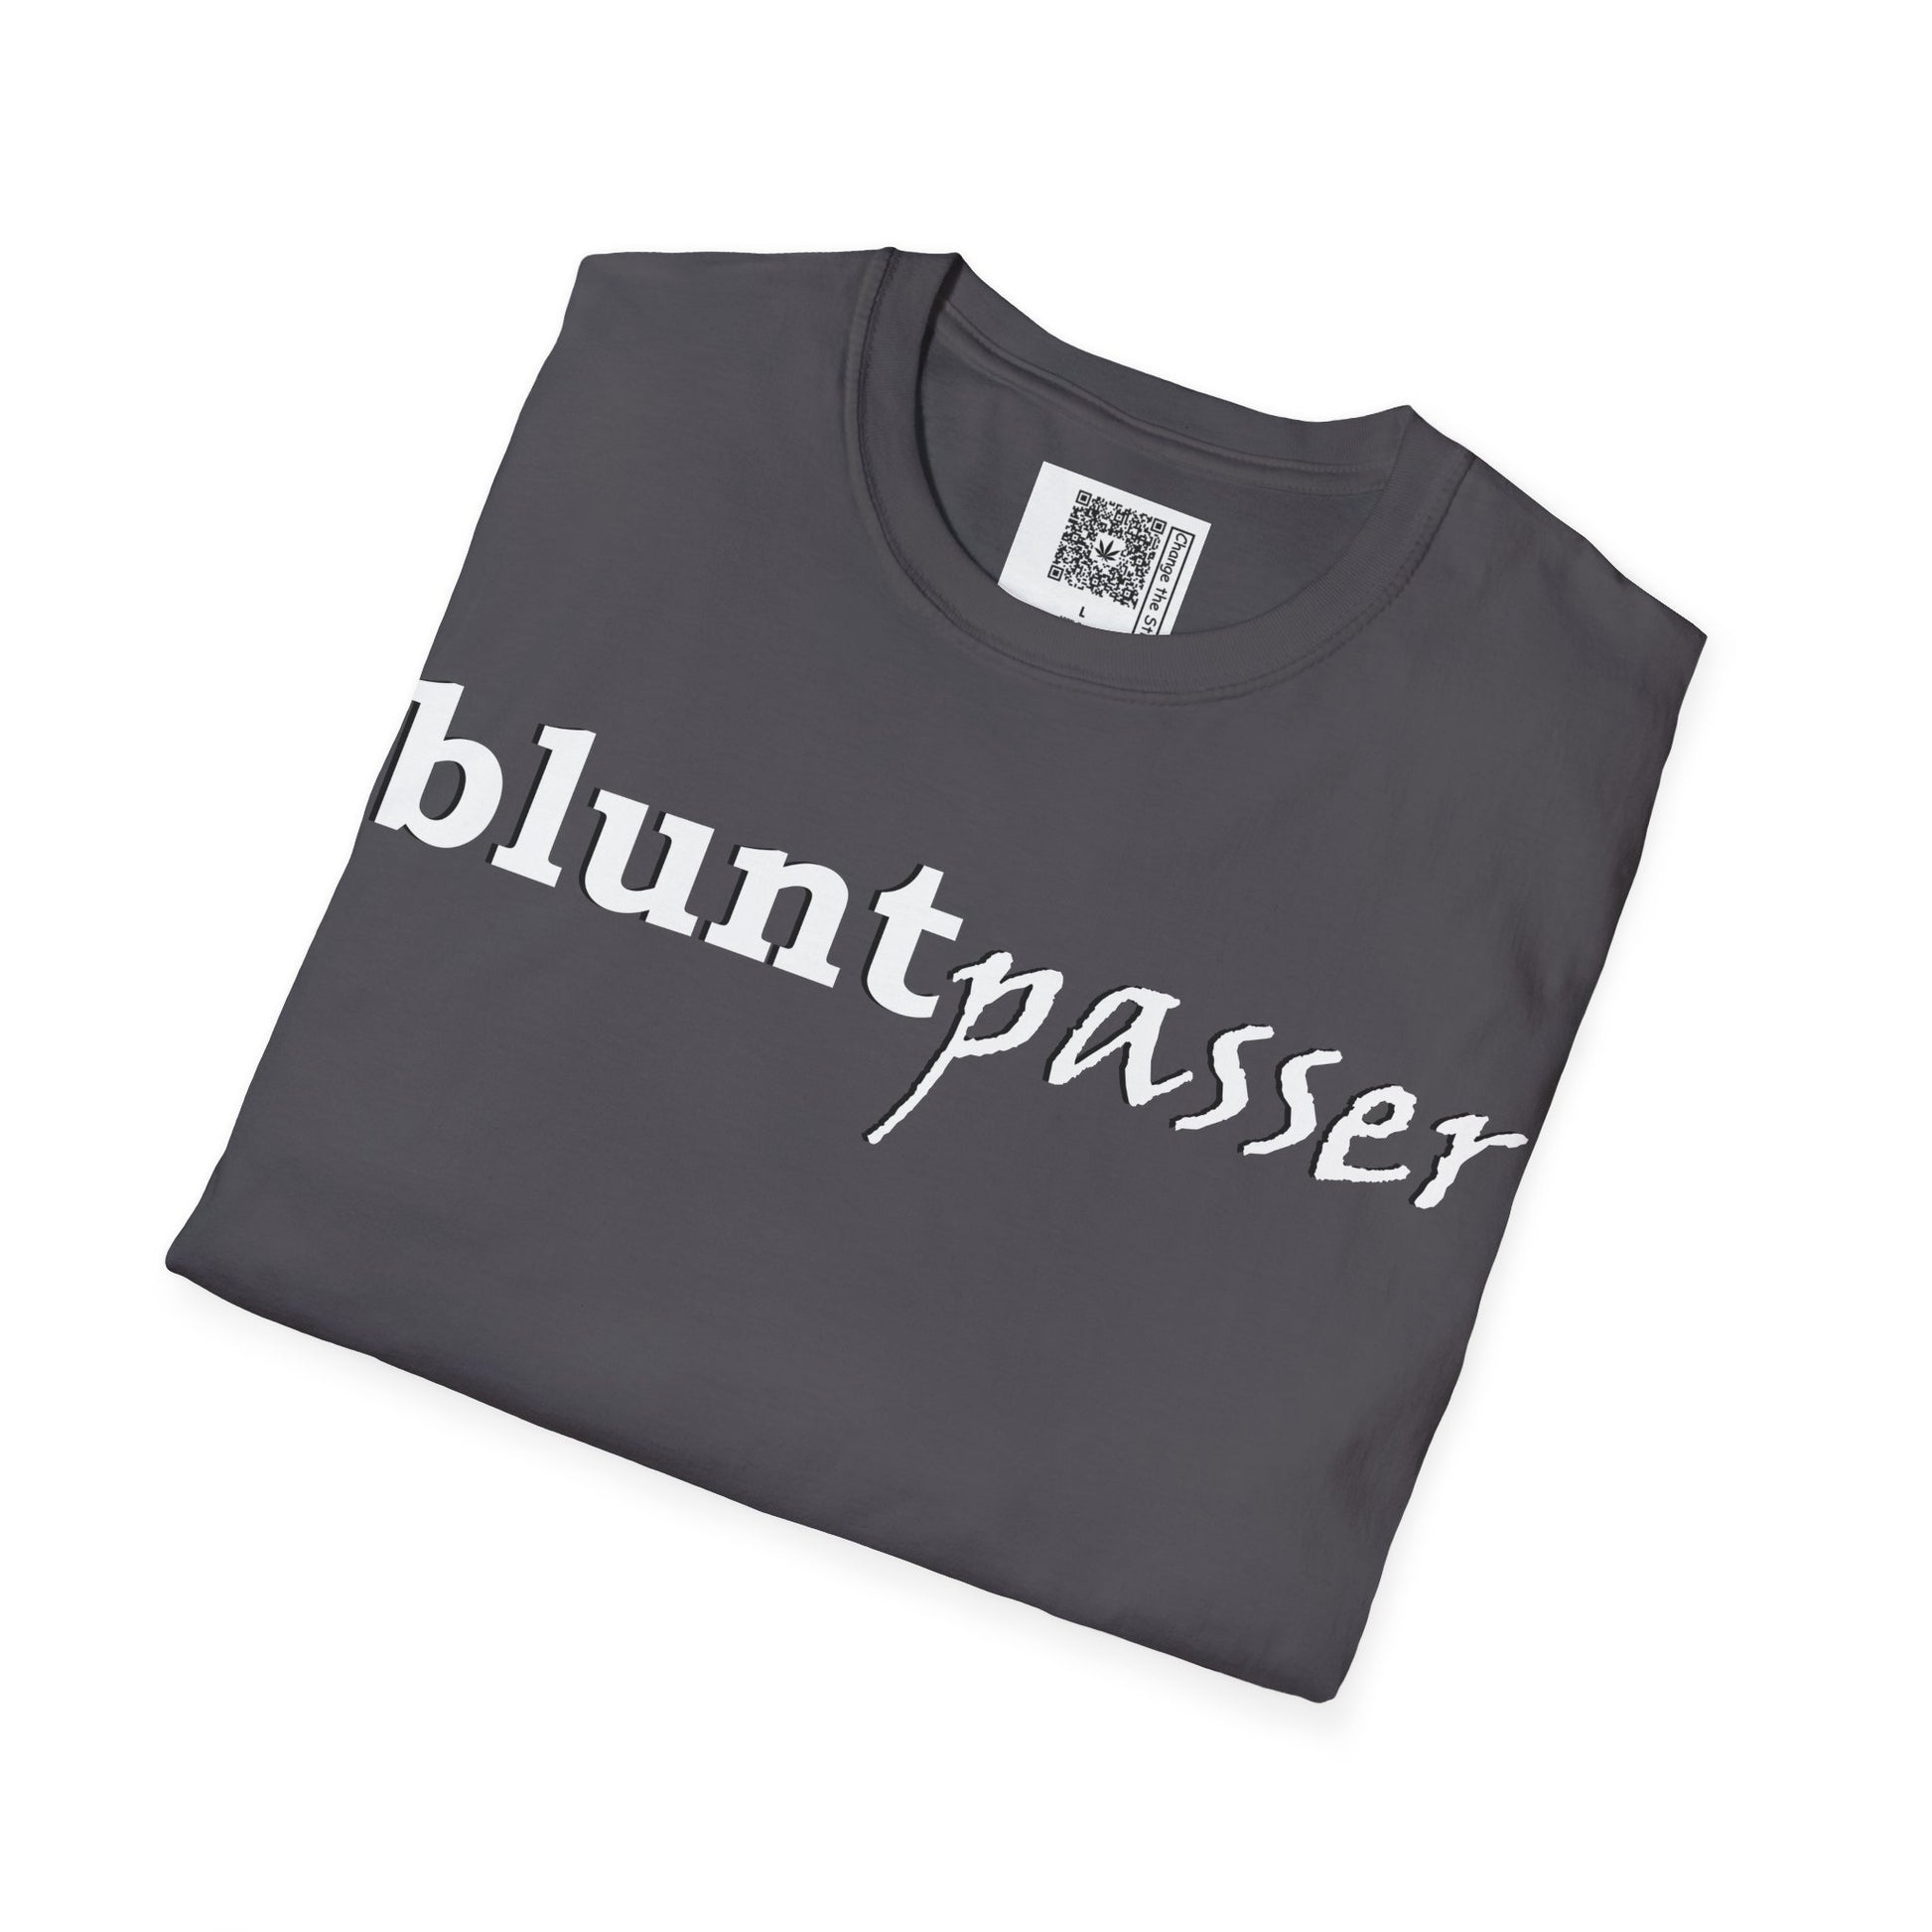 Change the Stigma, Charcoal color, shirt saying "blunt passer", Folded, Qr code is shown